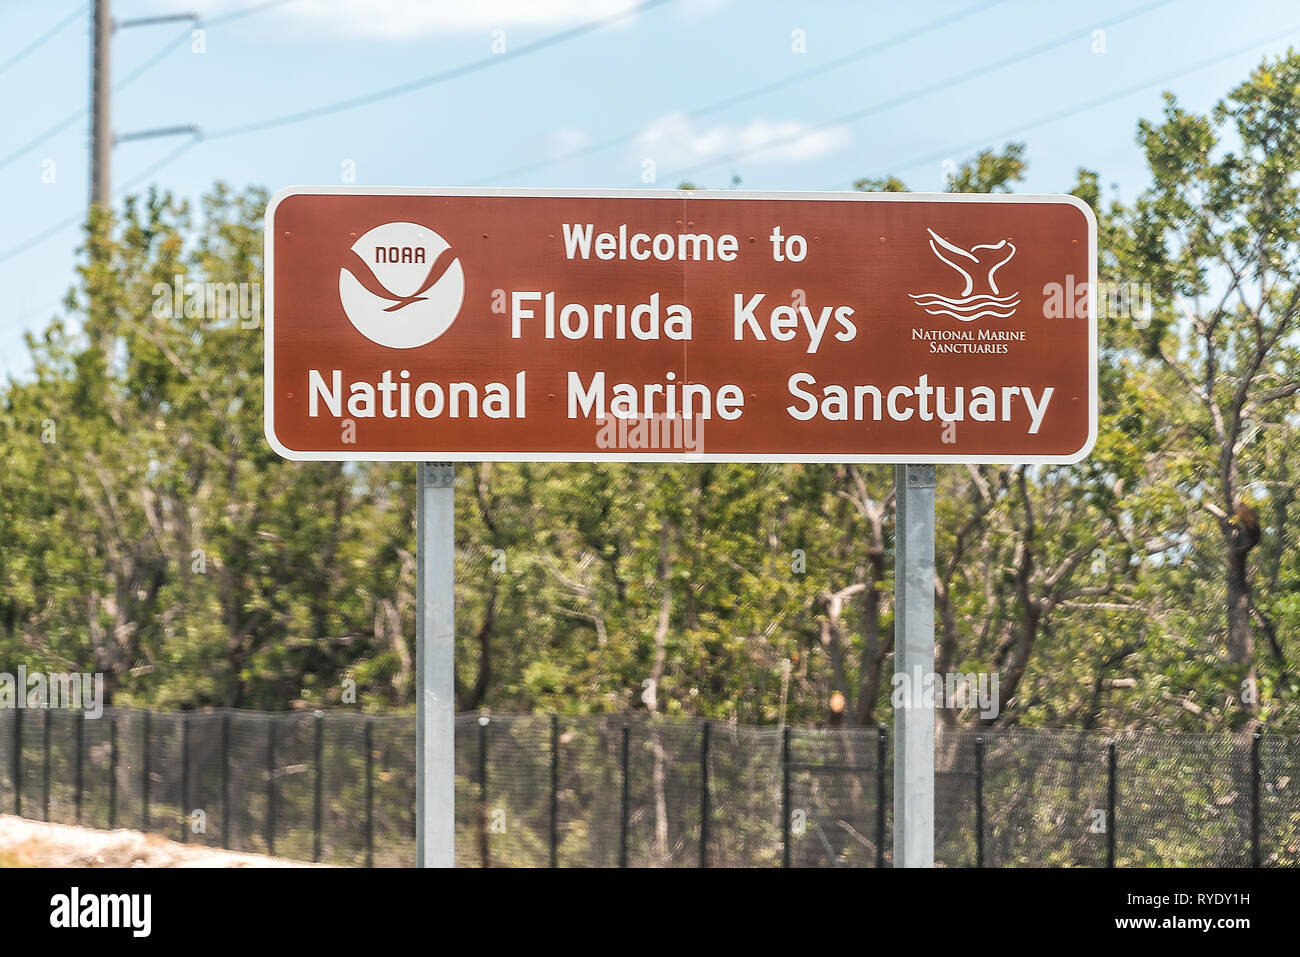 Key Largo, USA - April 30, 2018: Florida Keys sign for welcome to national marine sanctuary or noaa on overseas highway road Stock Photo